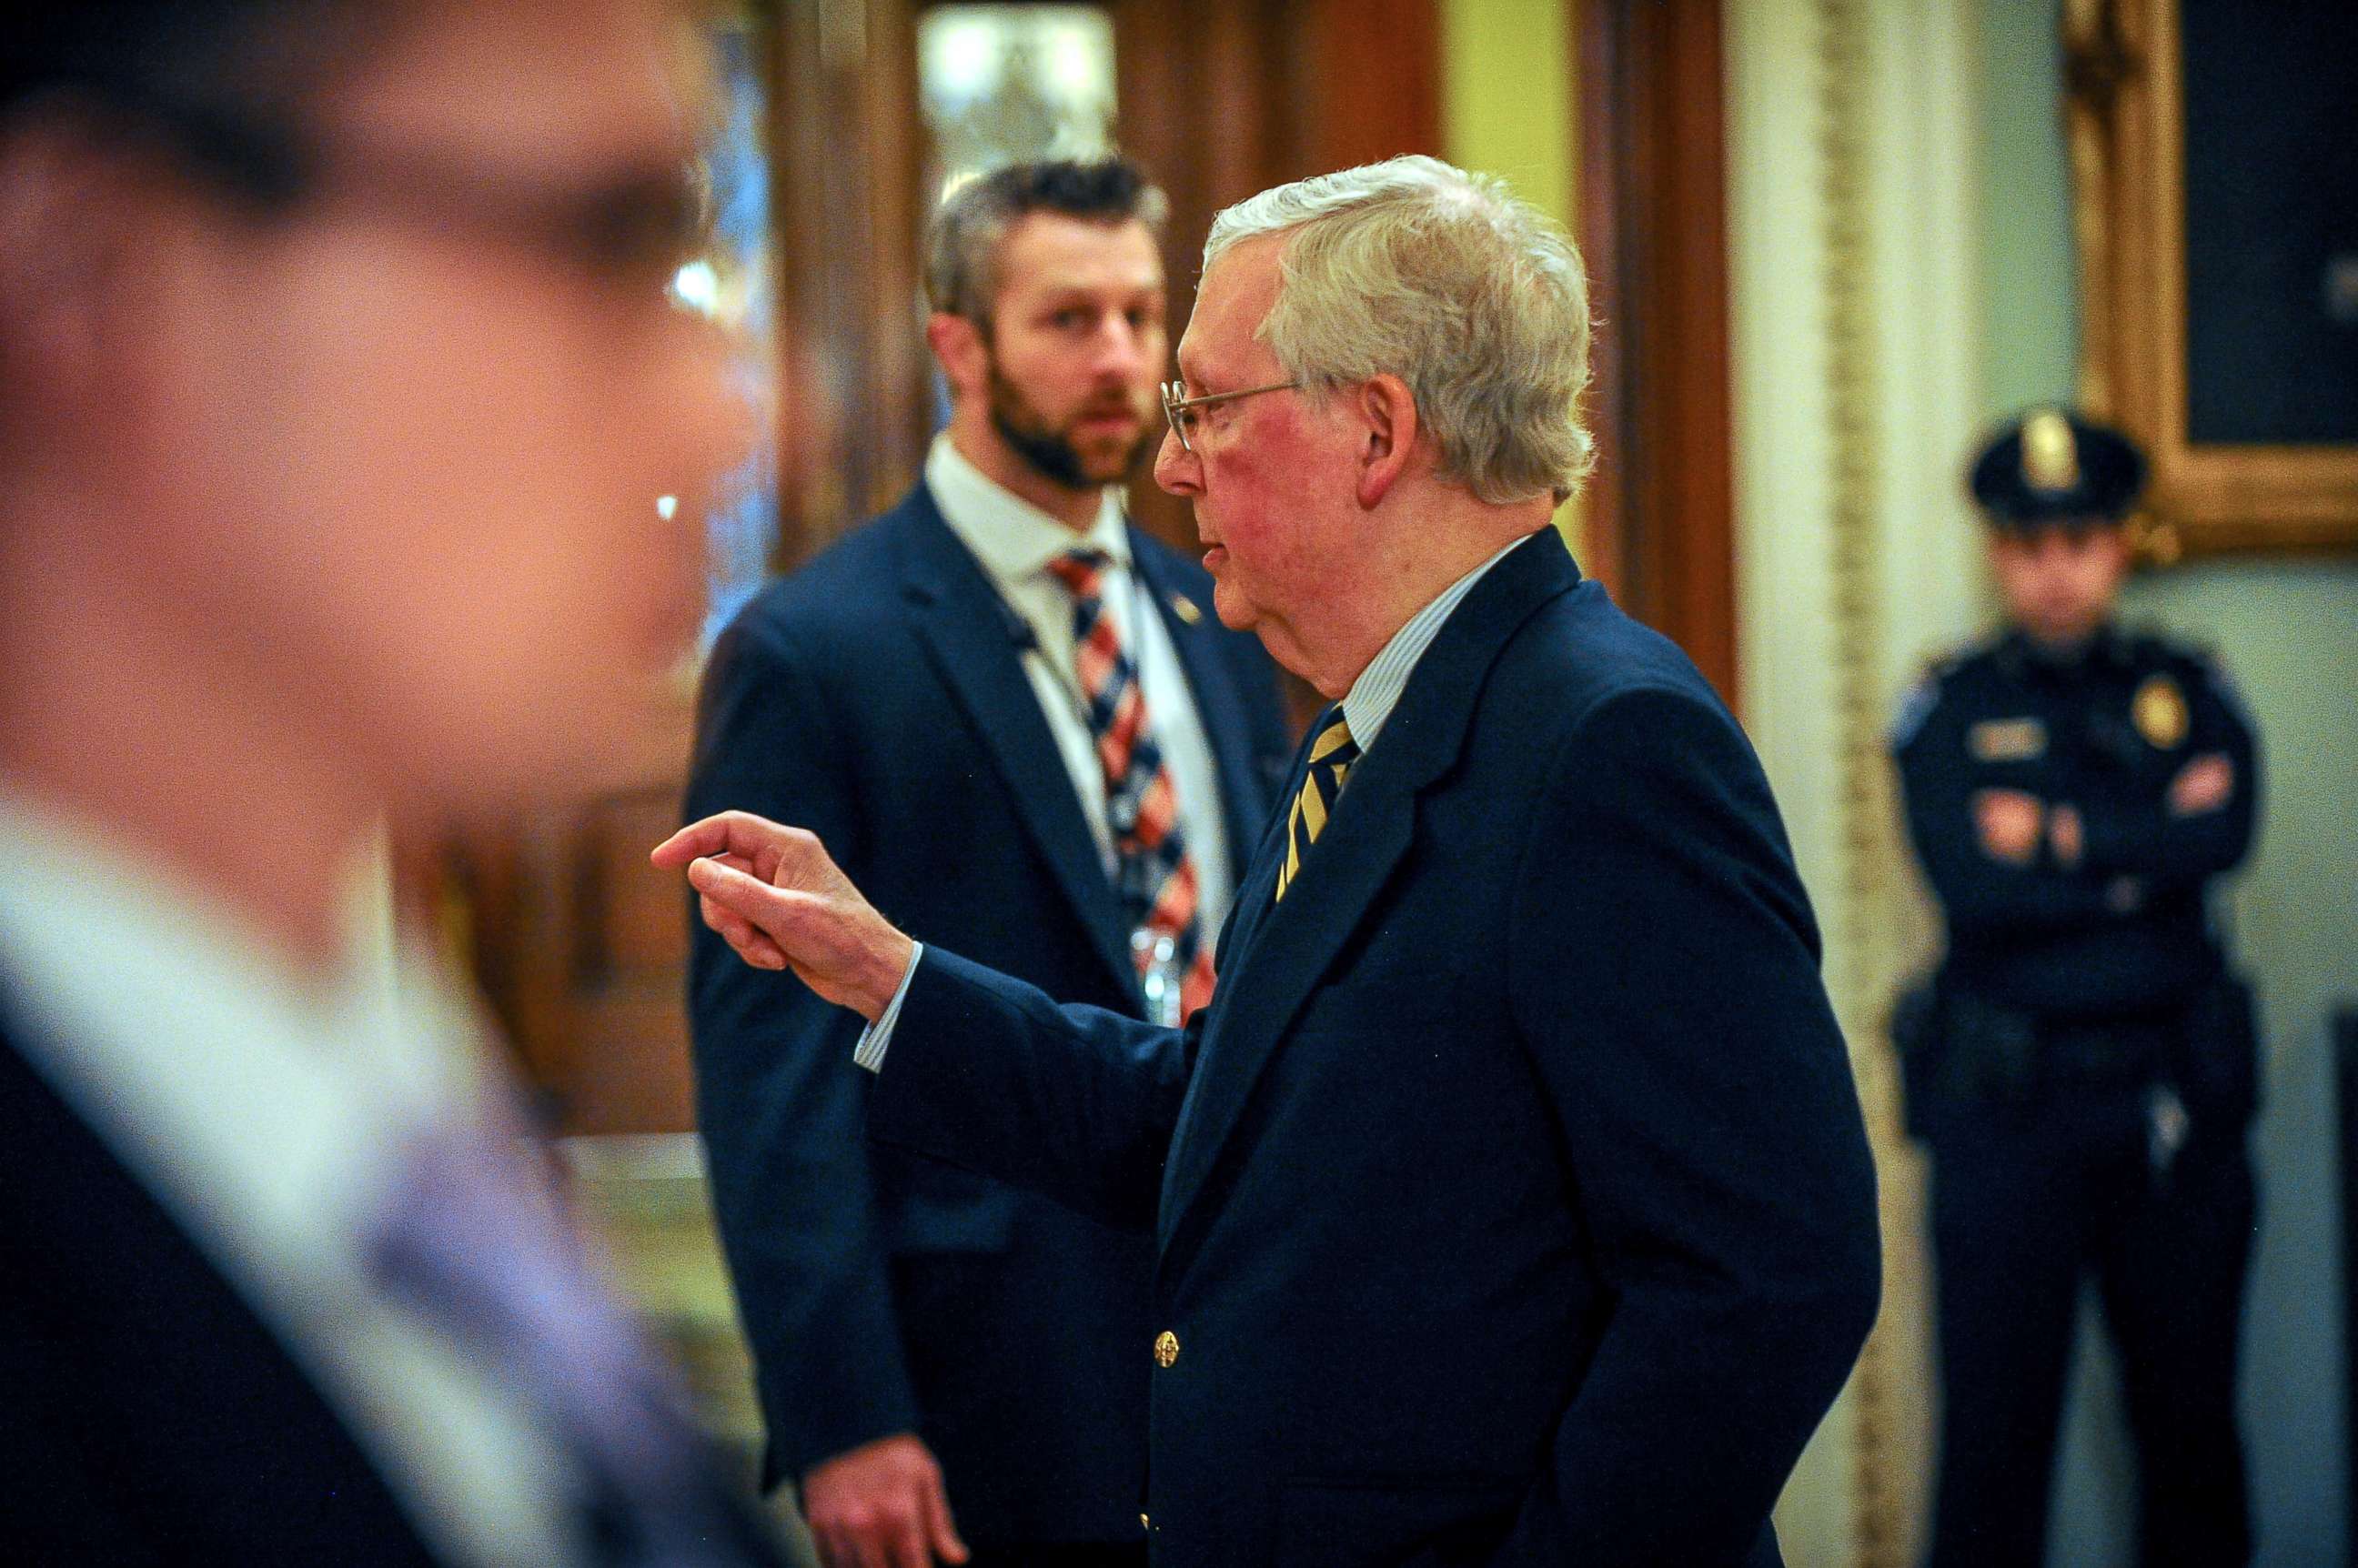 PHOTO: U.S. Senate Majority Leader Mitch McConnell (R-KY) speaks with the media after the motion failed in the attempt to wrap up work on coronavirus economic aid legislation in Washington, U.S., March 22, 2020. 